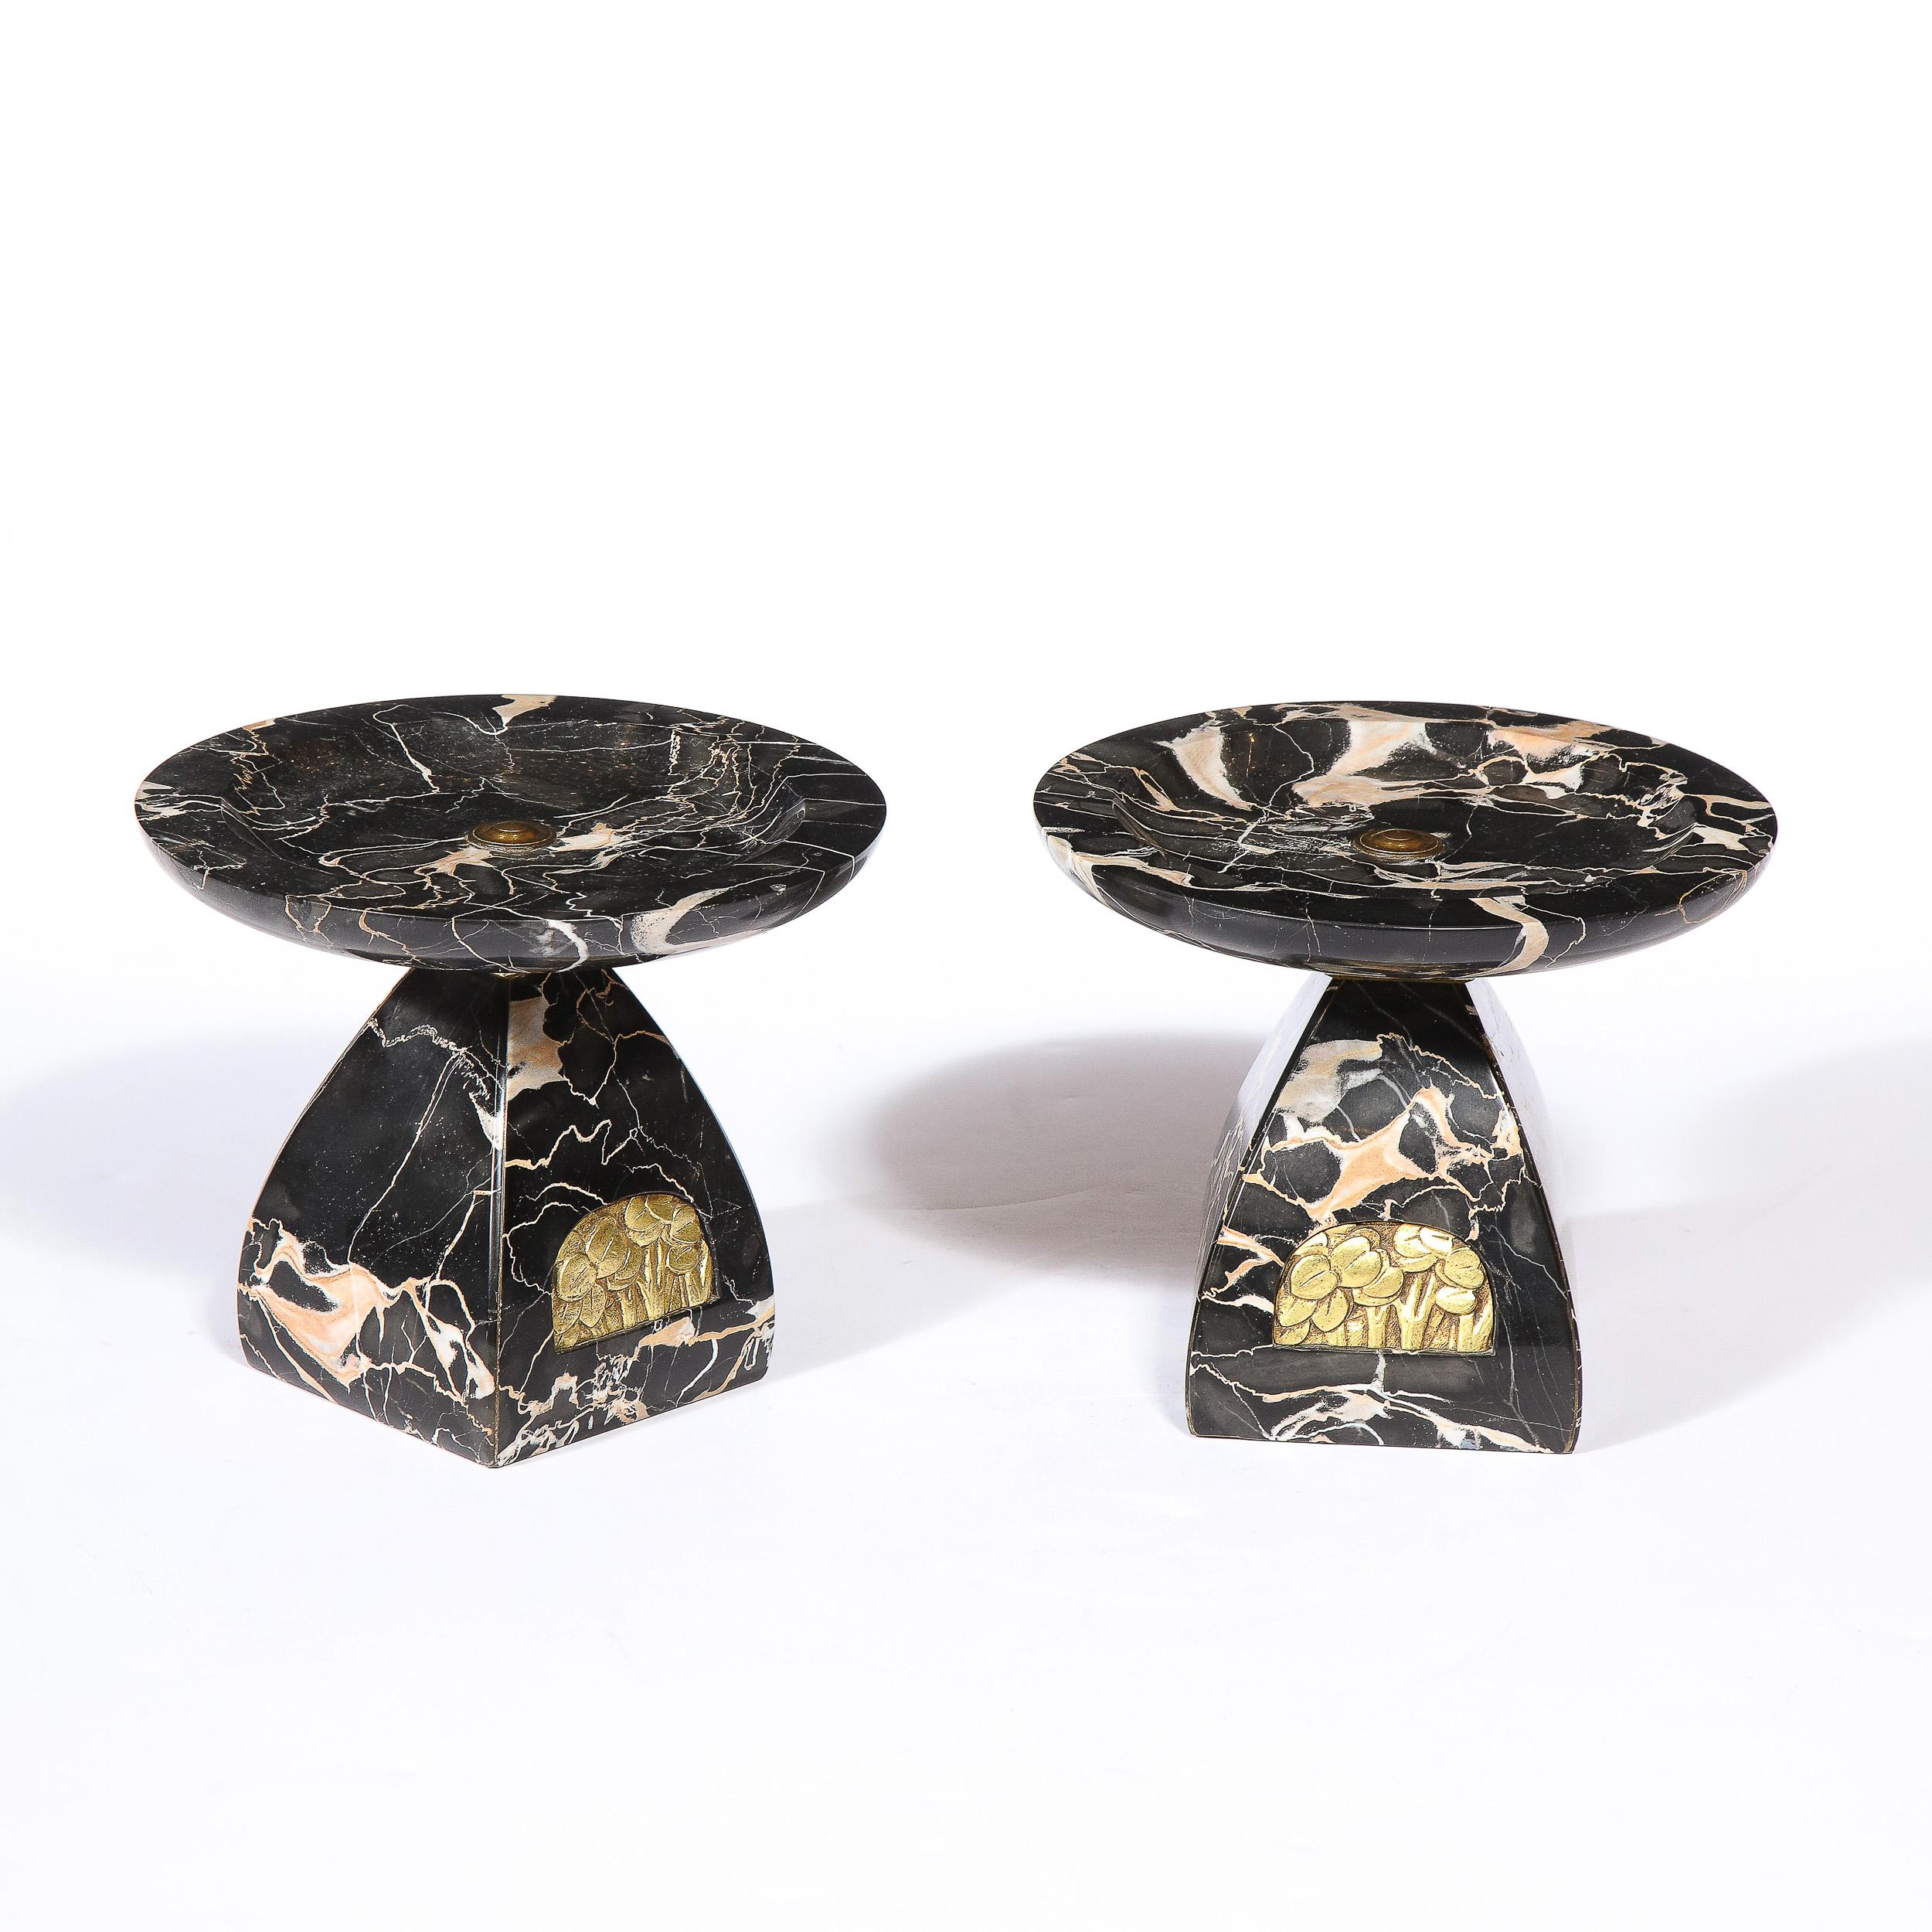 This stunning pair of French High Style Art Deco tazzas were realized in France circa 1930. They feature beveled streamlined bodies that taper at their necks where they adjoin concave tops- all in beautiful black exotic marble with dramatic veining.